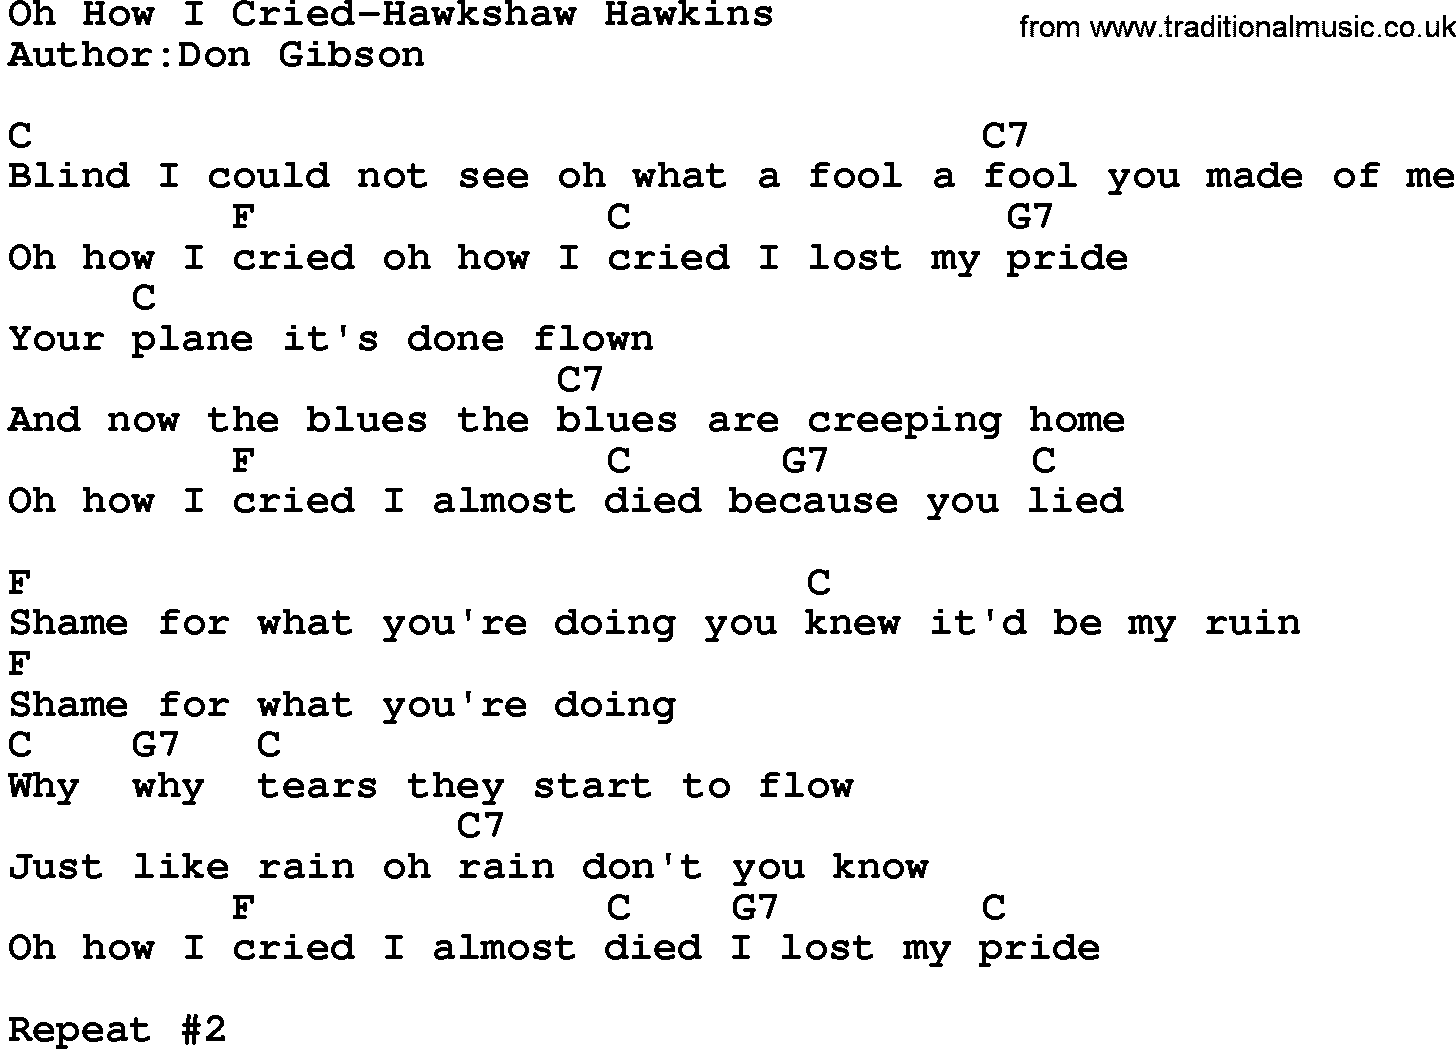 Country music song: Oh How I Cried-Hawkshaw Hawkins lyrics and chords